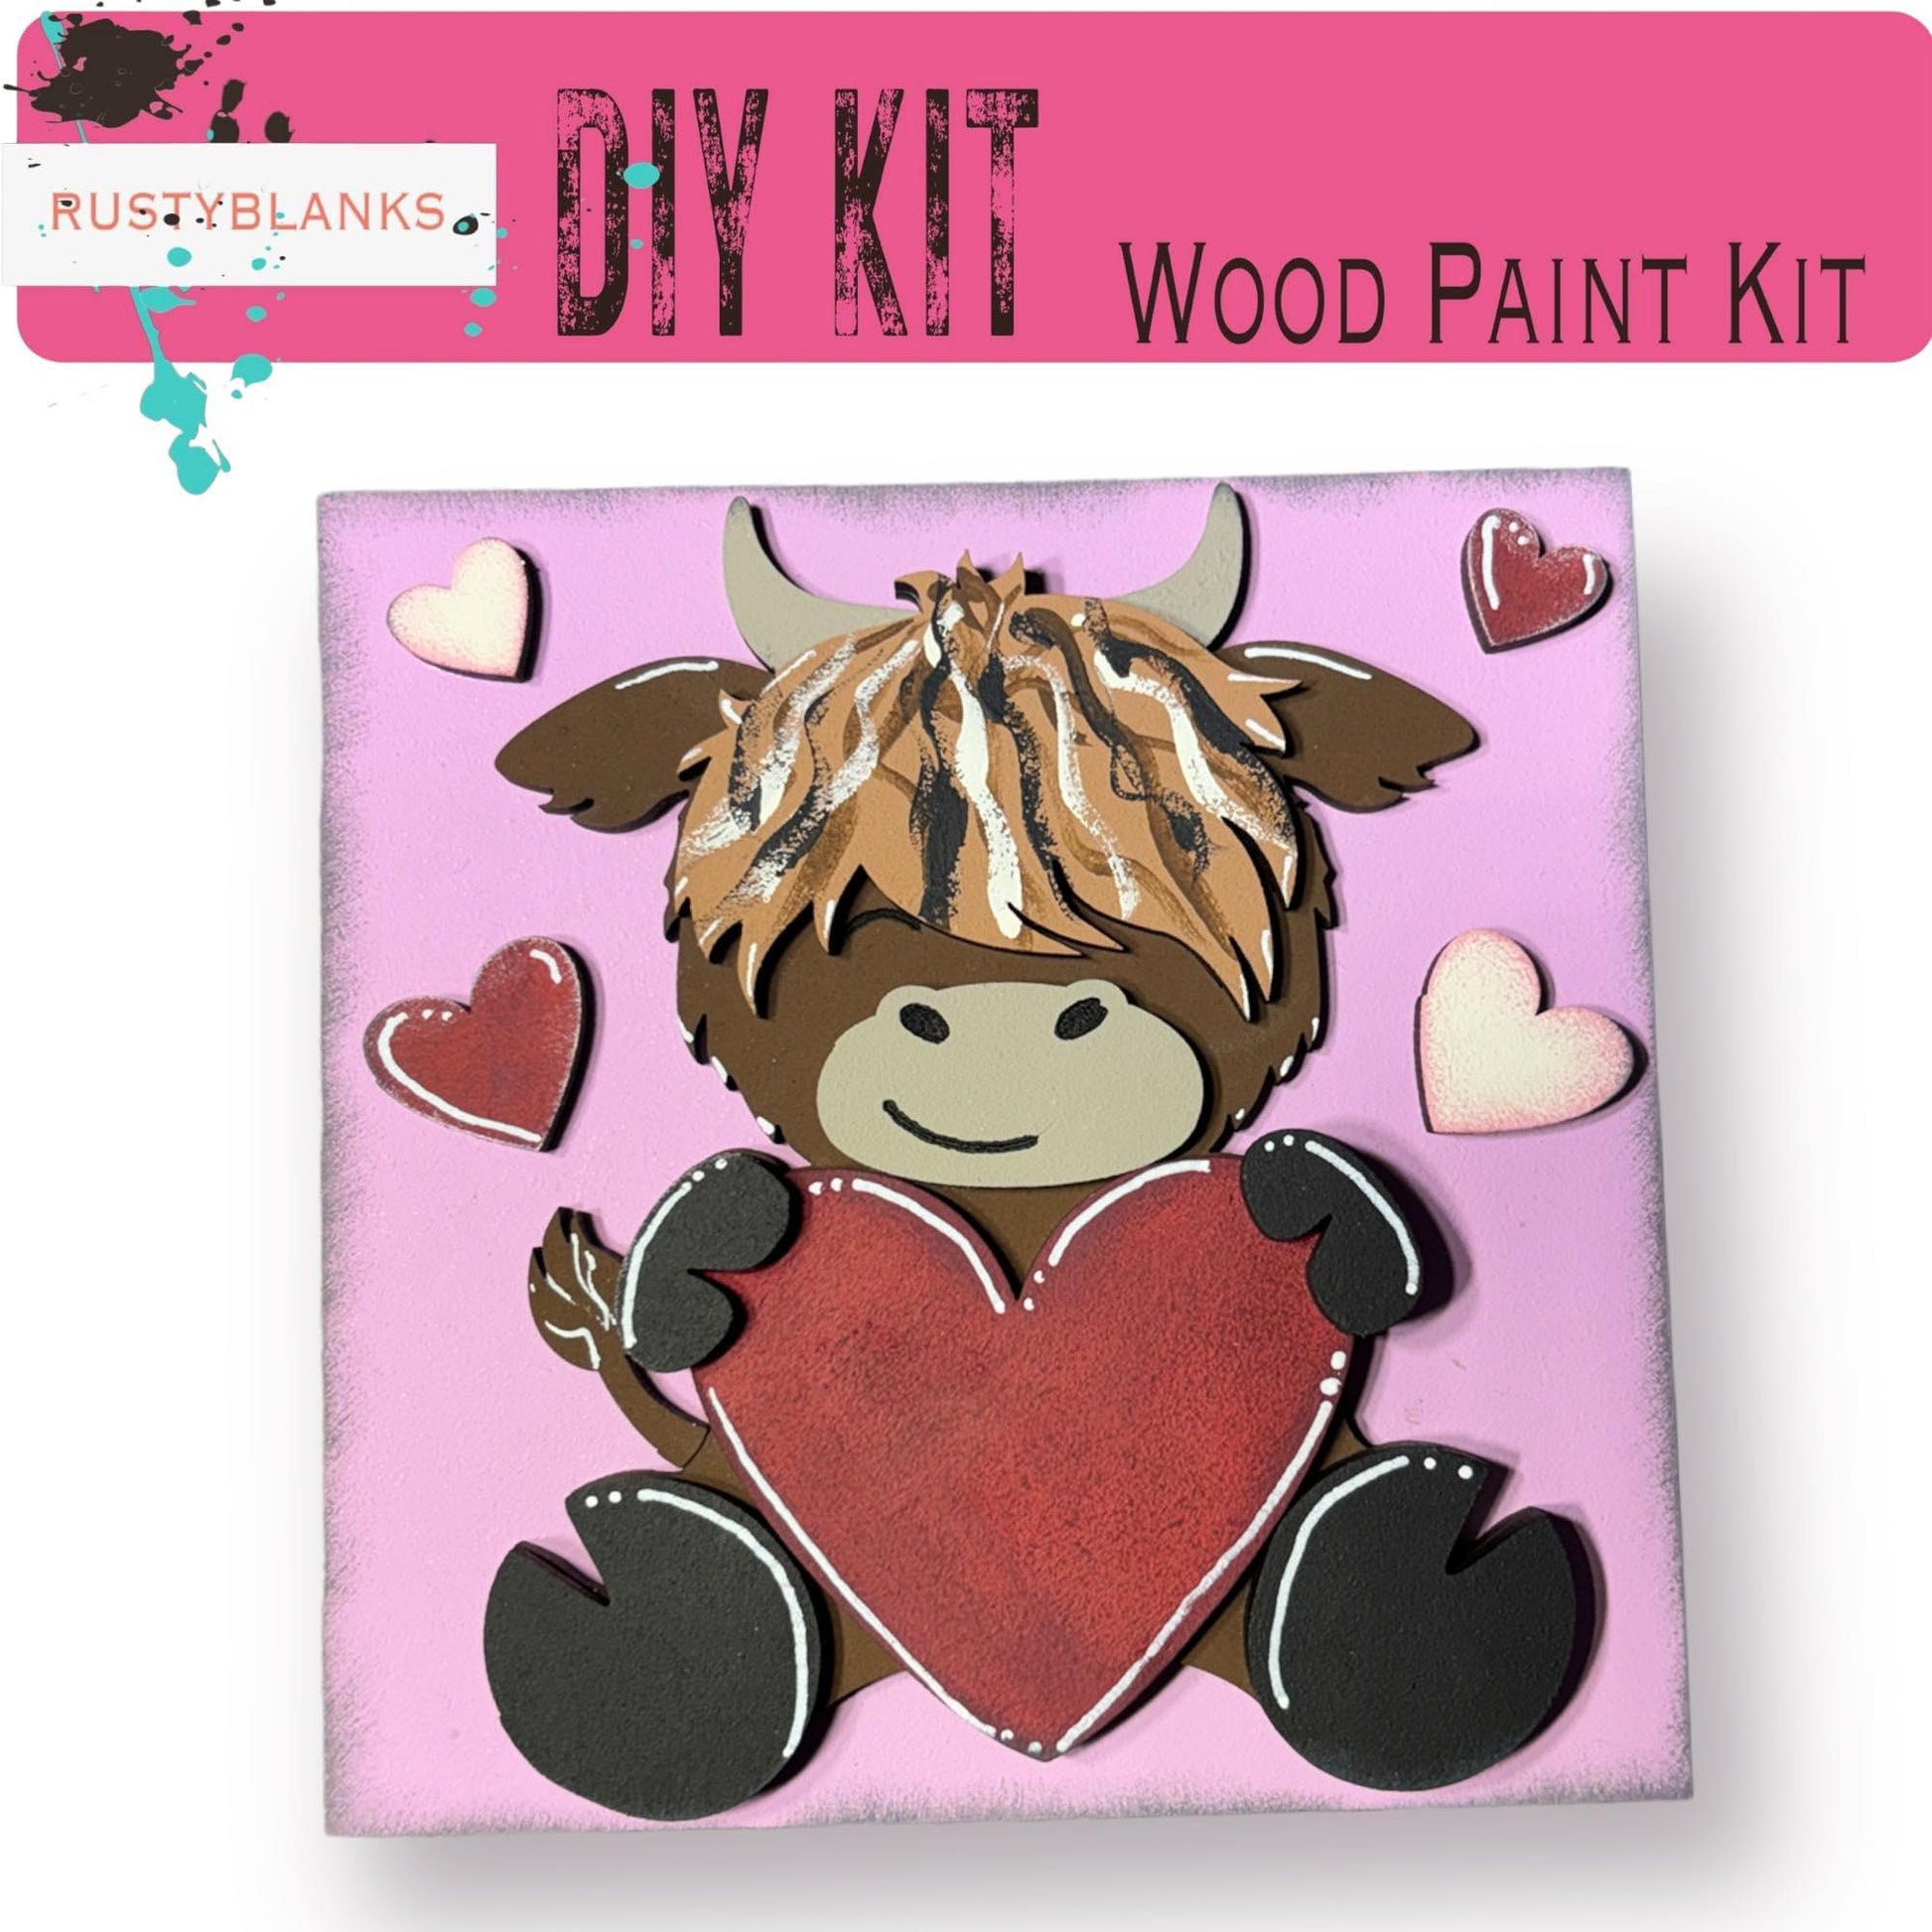 Valentine's Interchangeable Highland Love You Mooo Tiles for leaning ladders or Shelf Sitters - RusticFarmhouseDecor